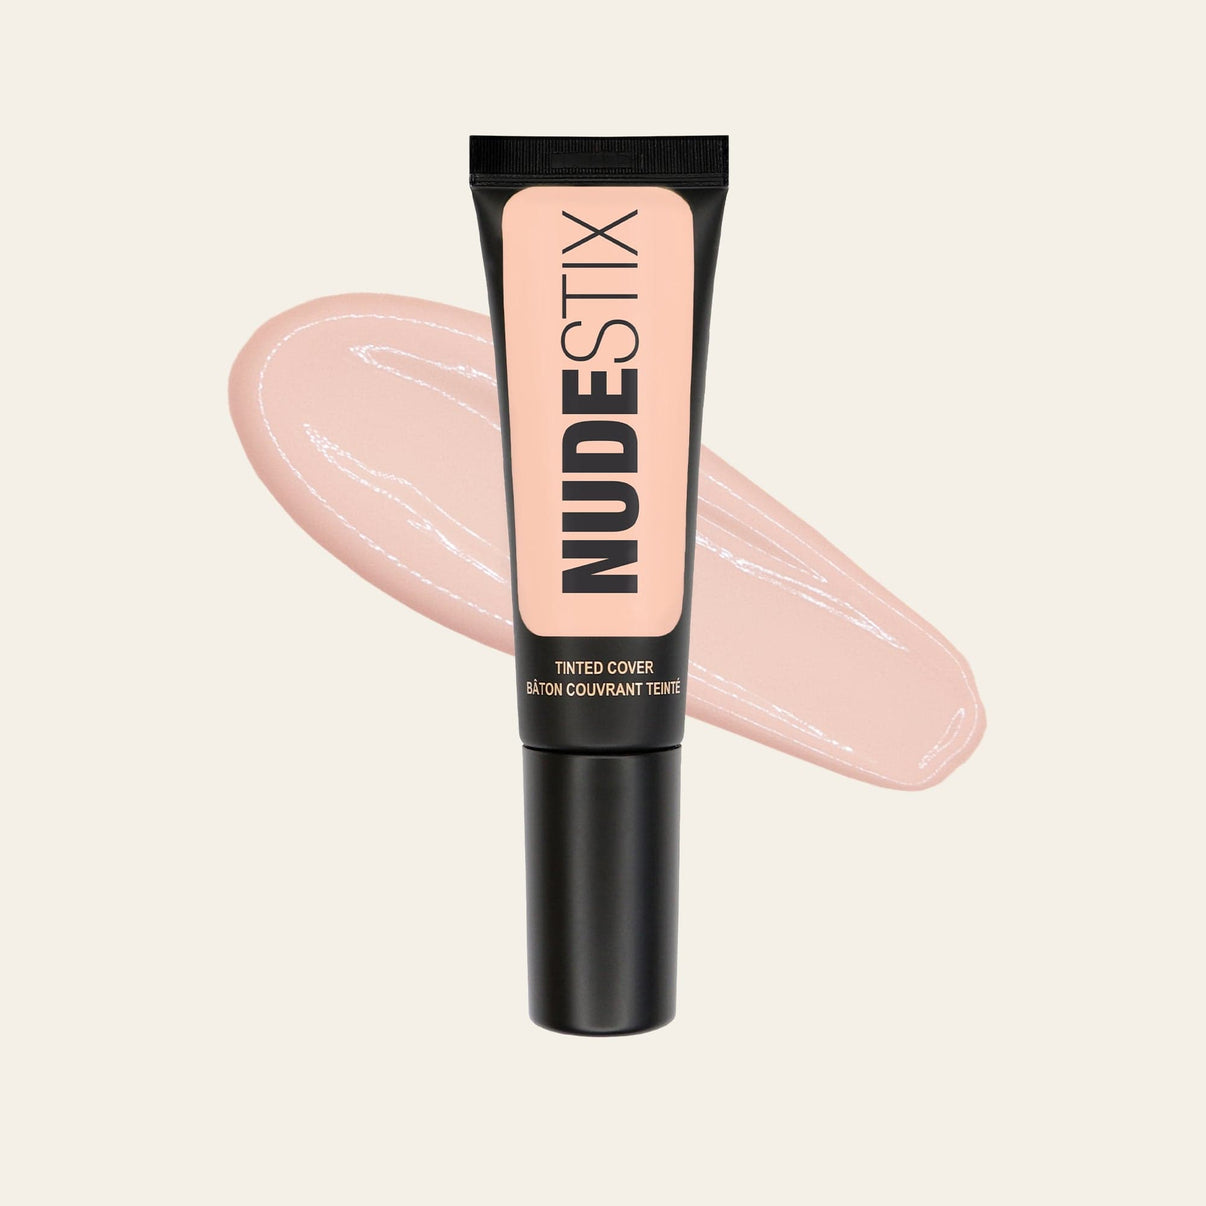 Tinted Cover Liquid Foundation in shade Nude 1.5 with texture swatch